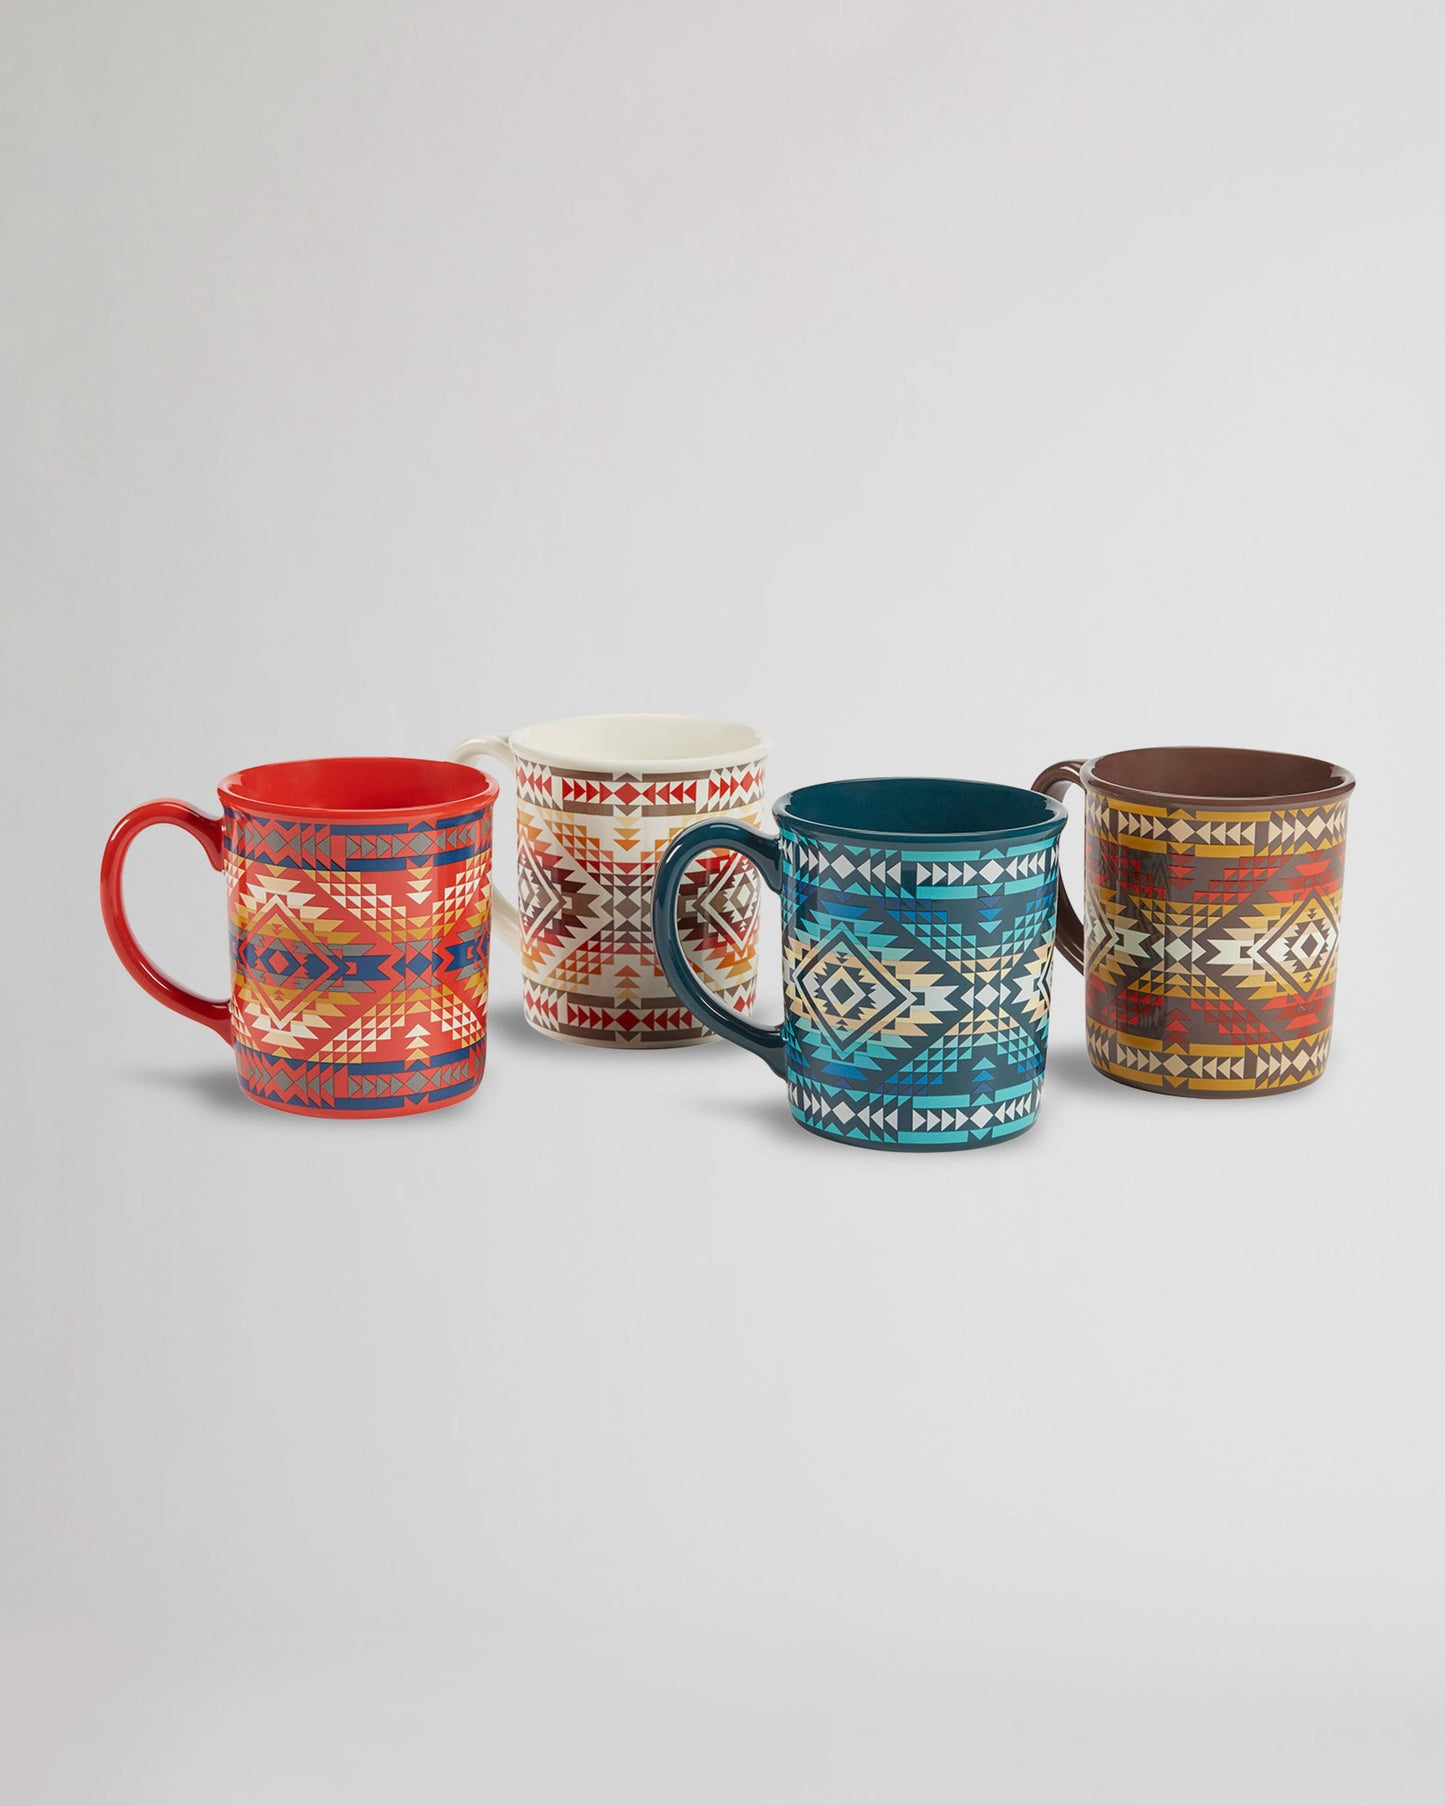 Load image into Gallery viewer, Pendleton Collectible Ceramic Mugs (Set of 4) - Smith Rock Collection
